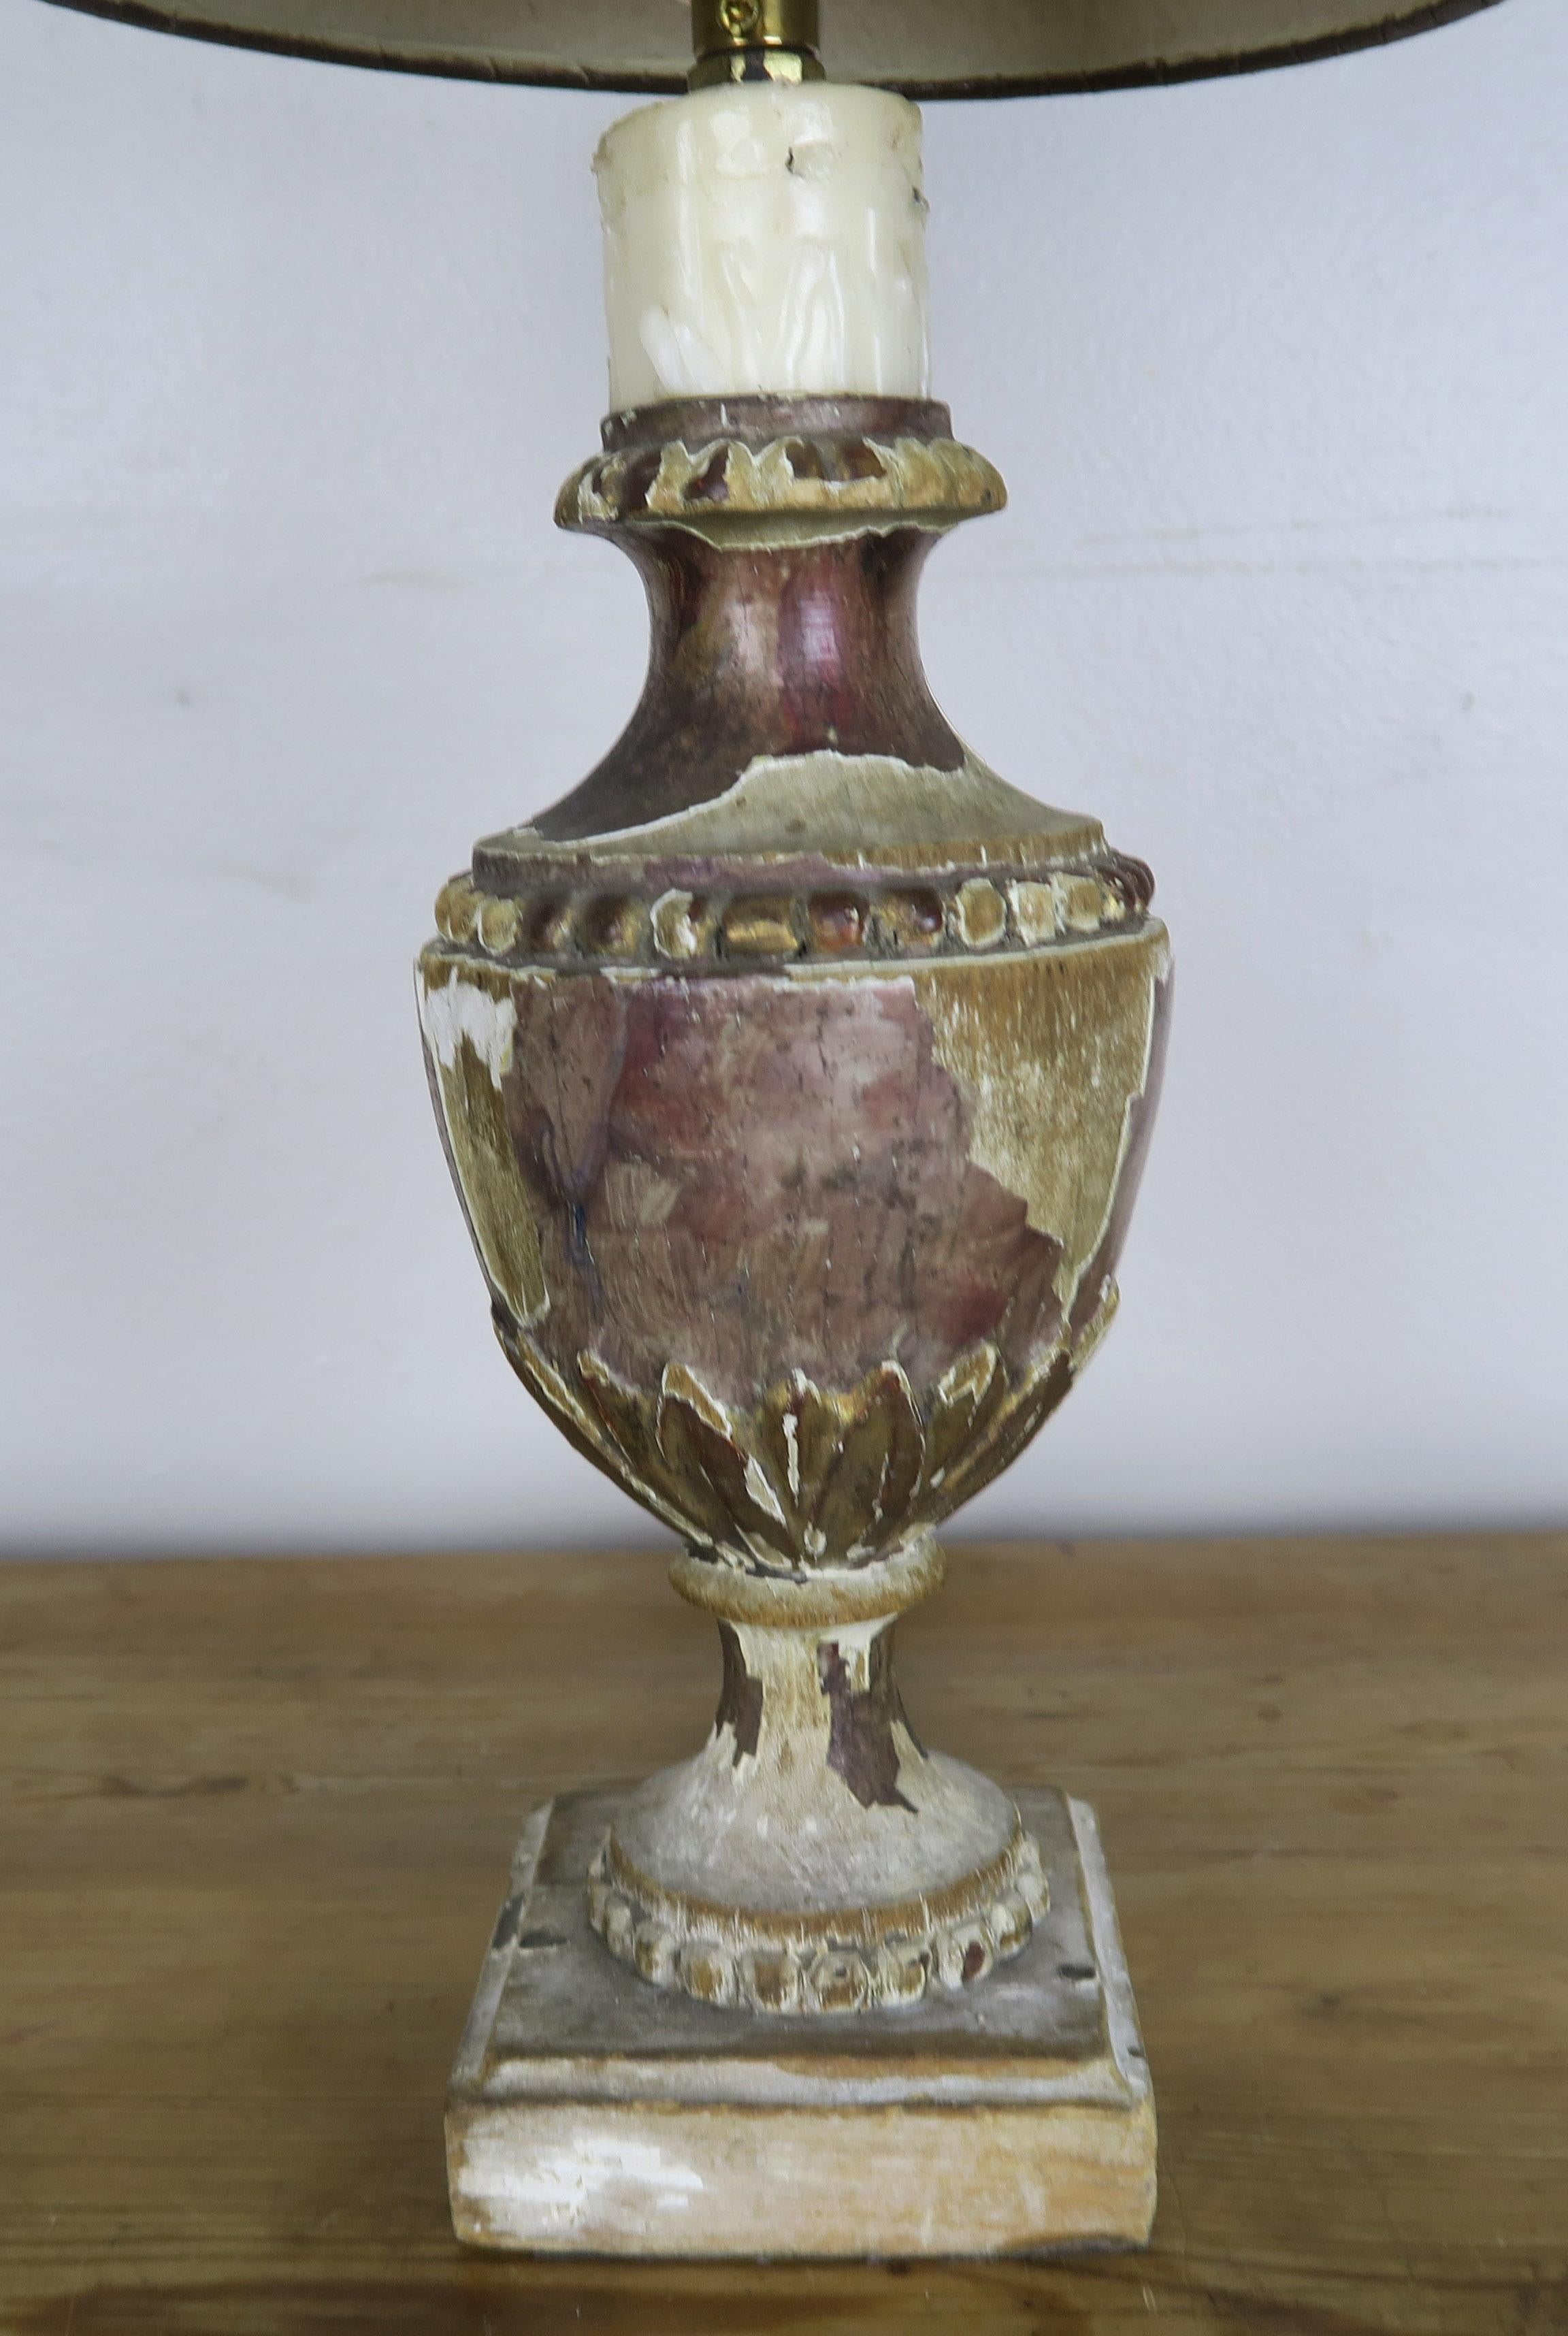 Petite Italian urn wired into a lamp and crowned with a hand painted parchment shade. The lamp is wired and in working condition.